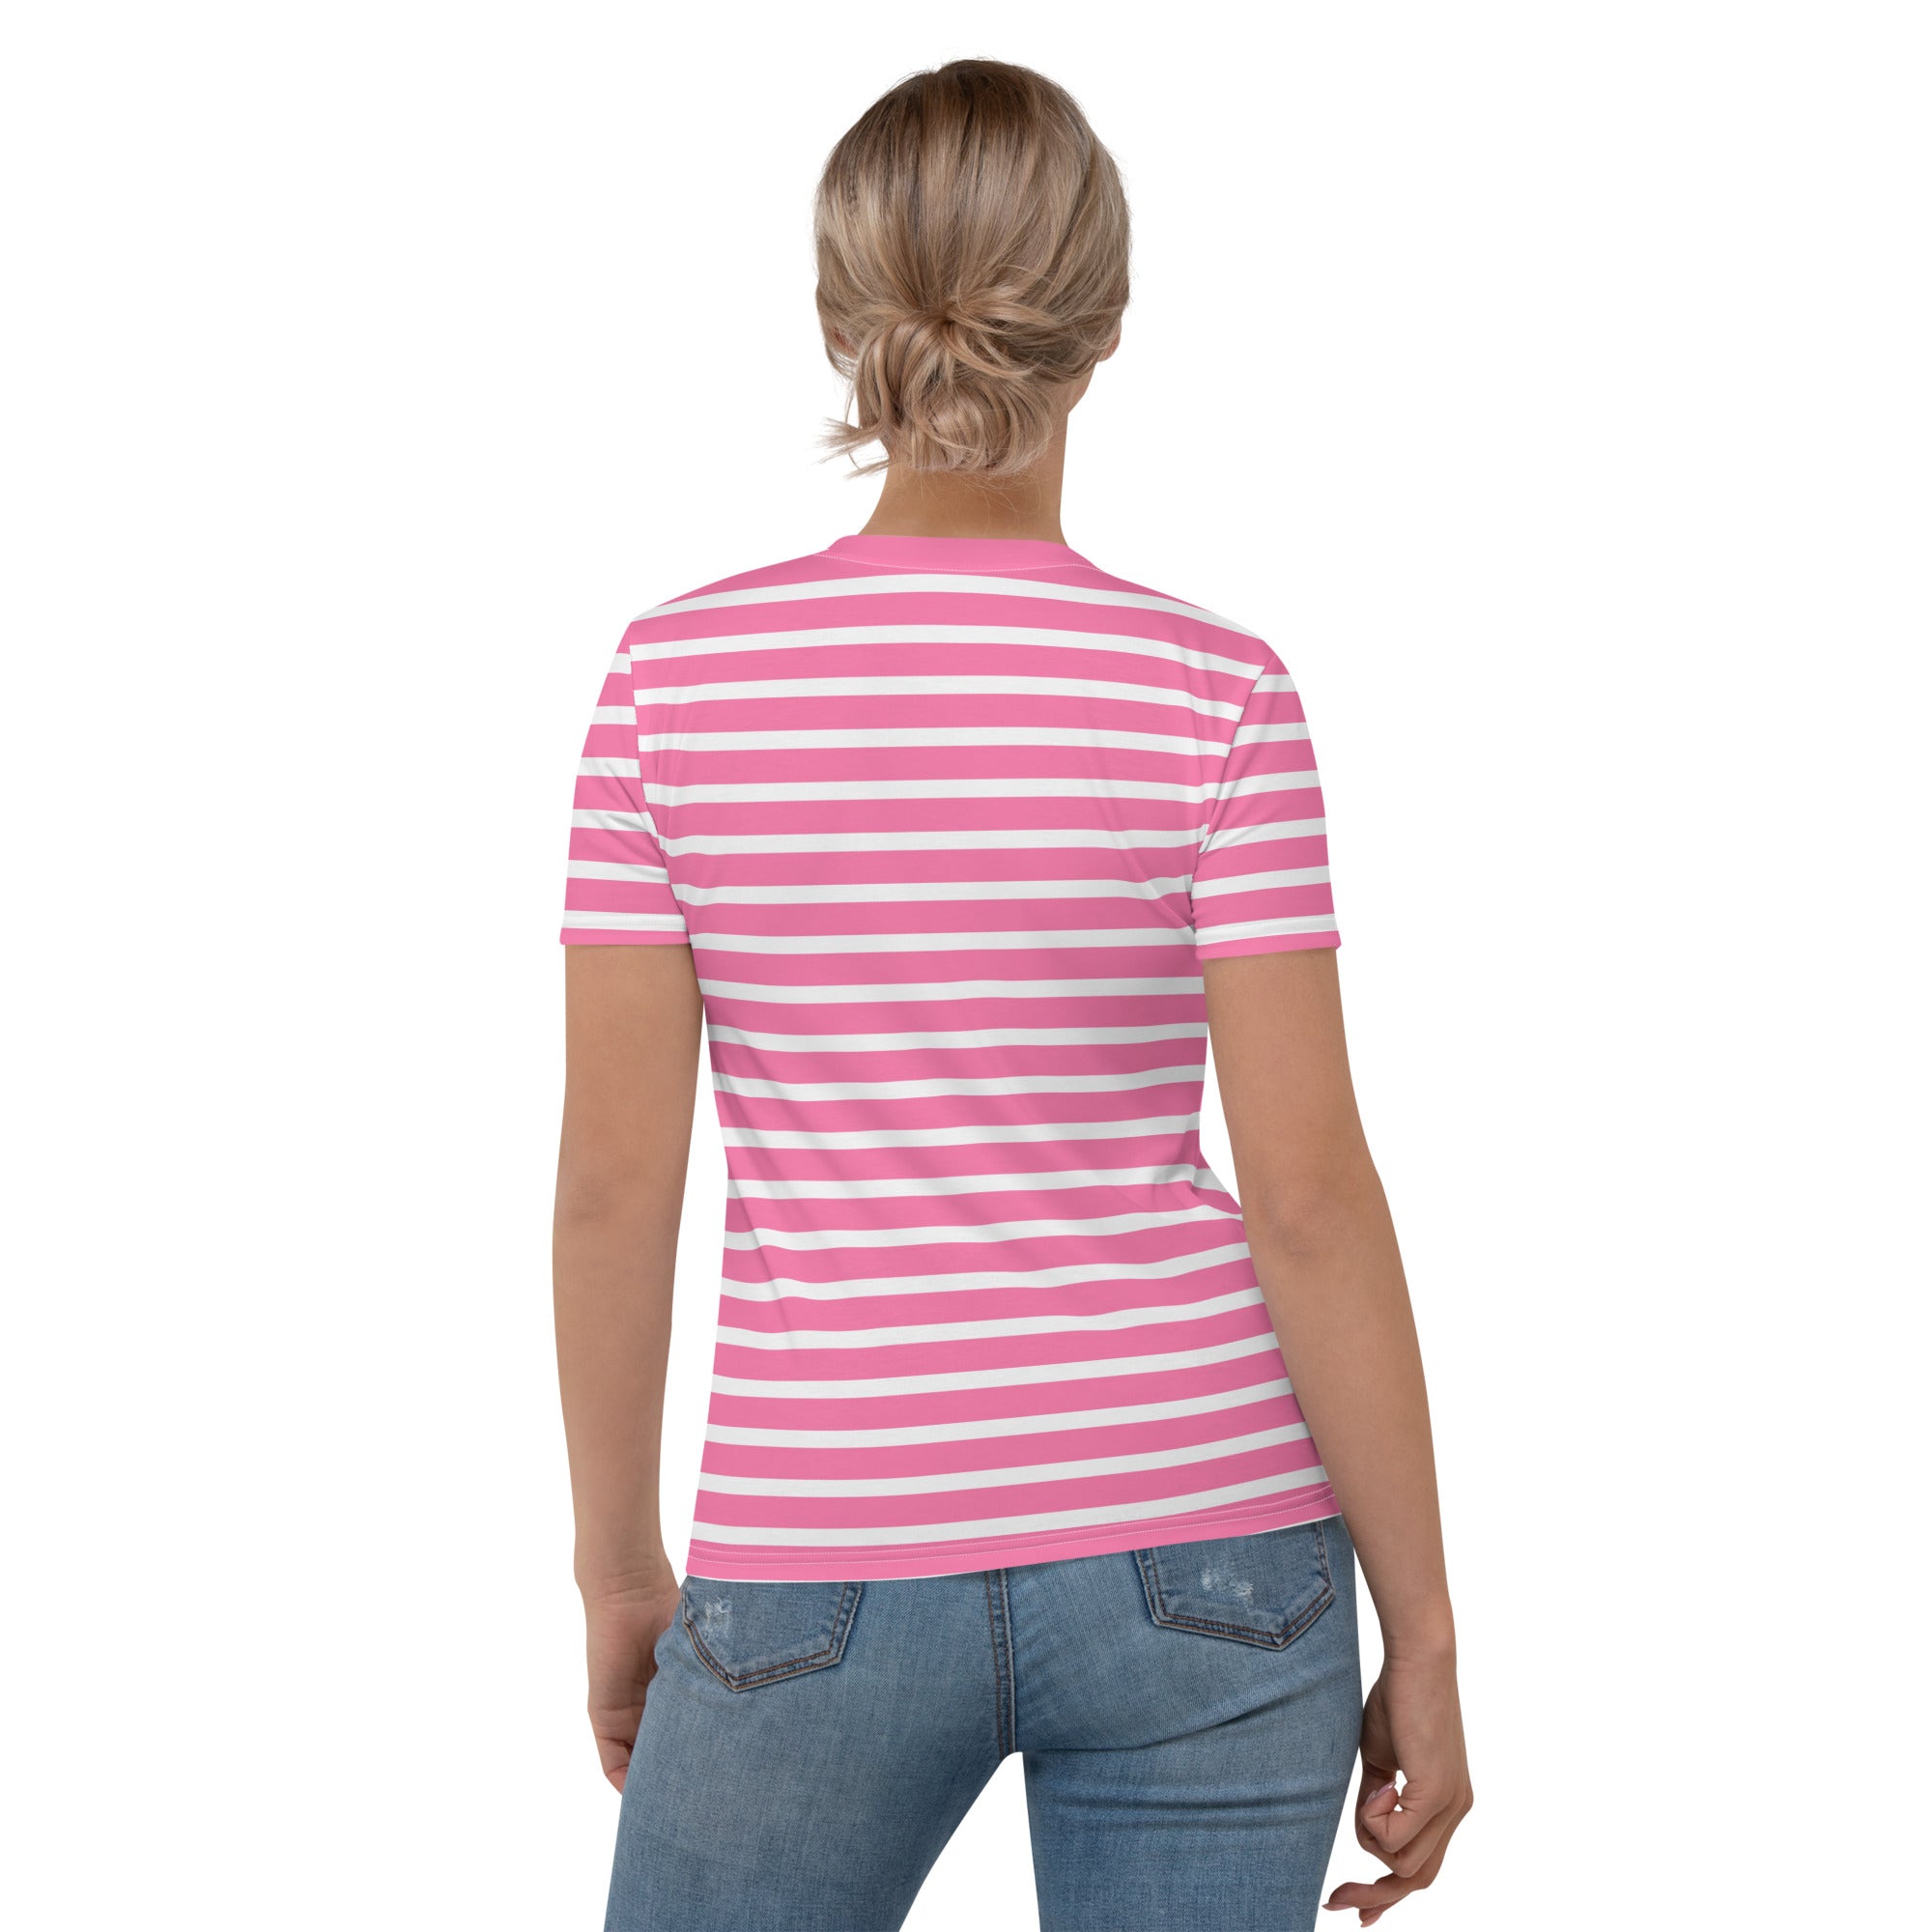 Women's T-shirt- White and Pink Striped